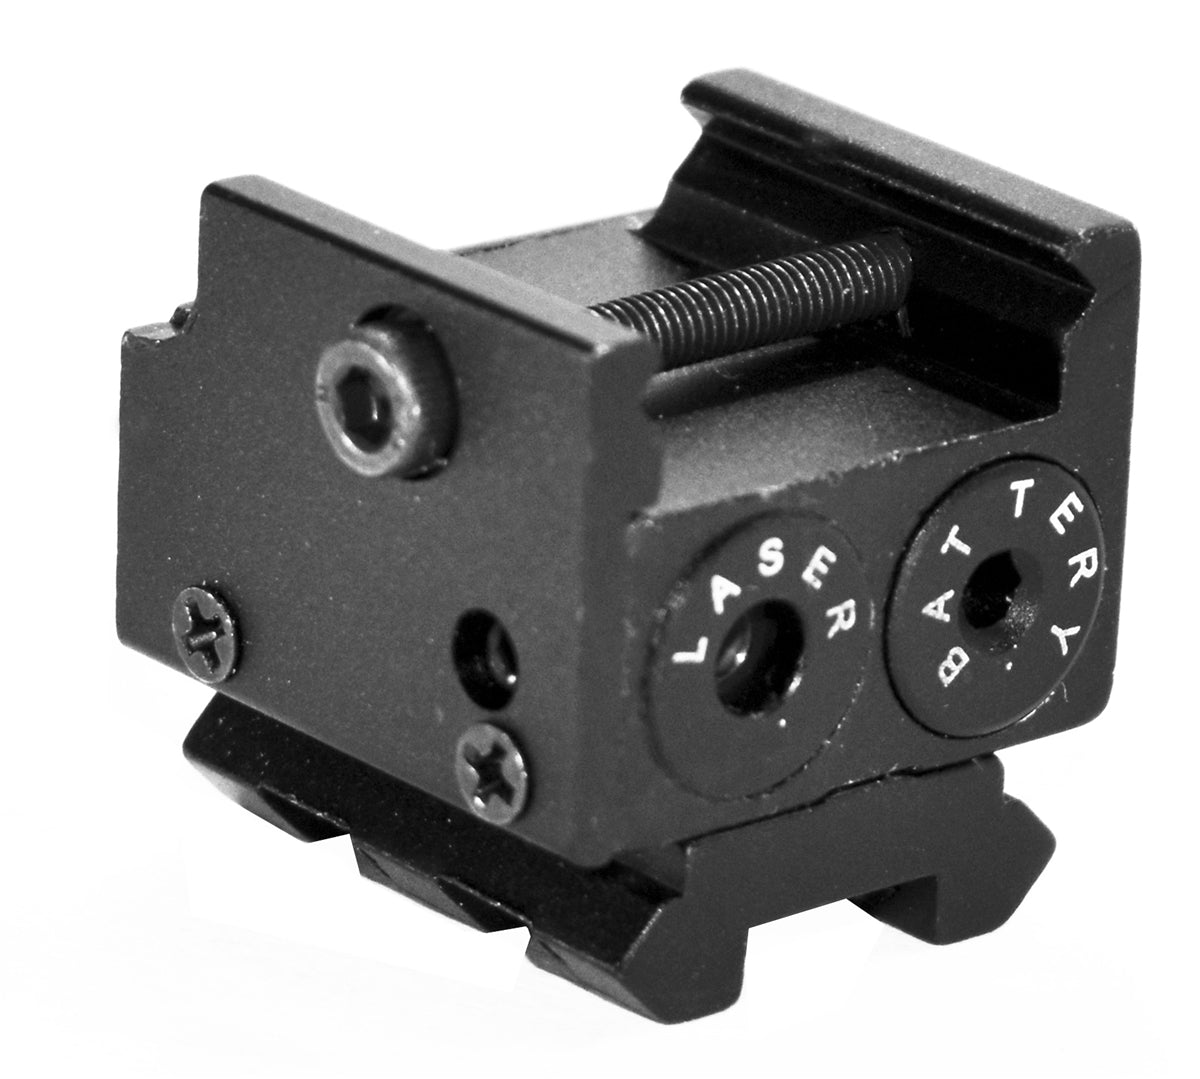 Trinity Compact Red Pistol Laser Sight For Sig Sauer P320 picatinny weaver mount.